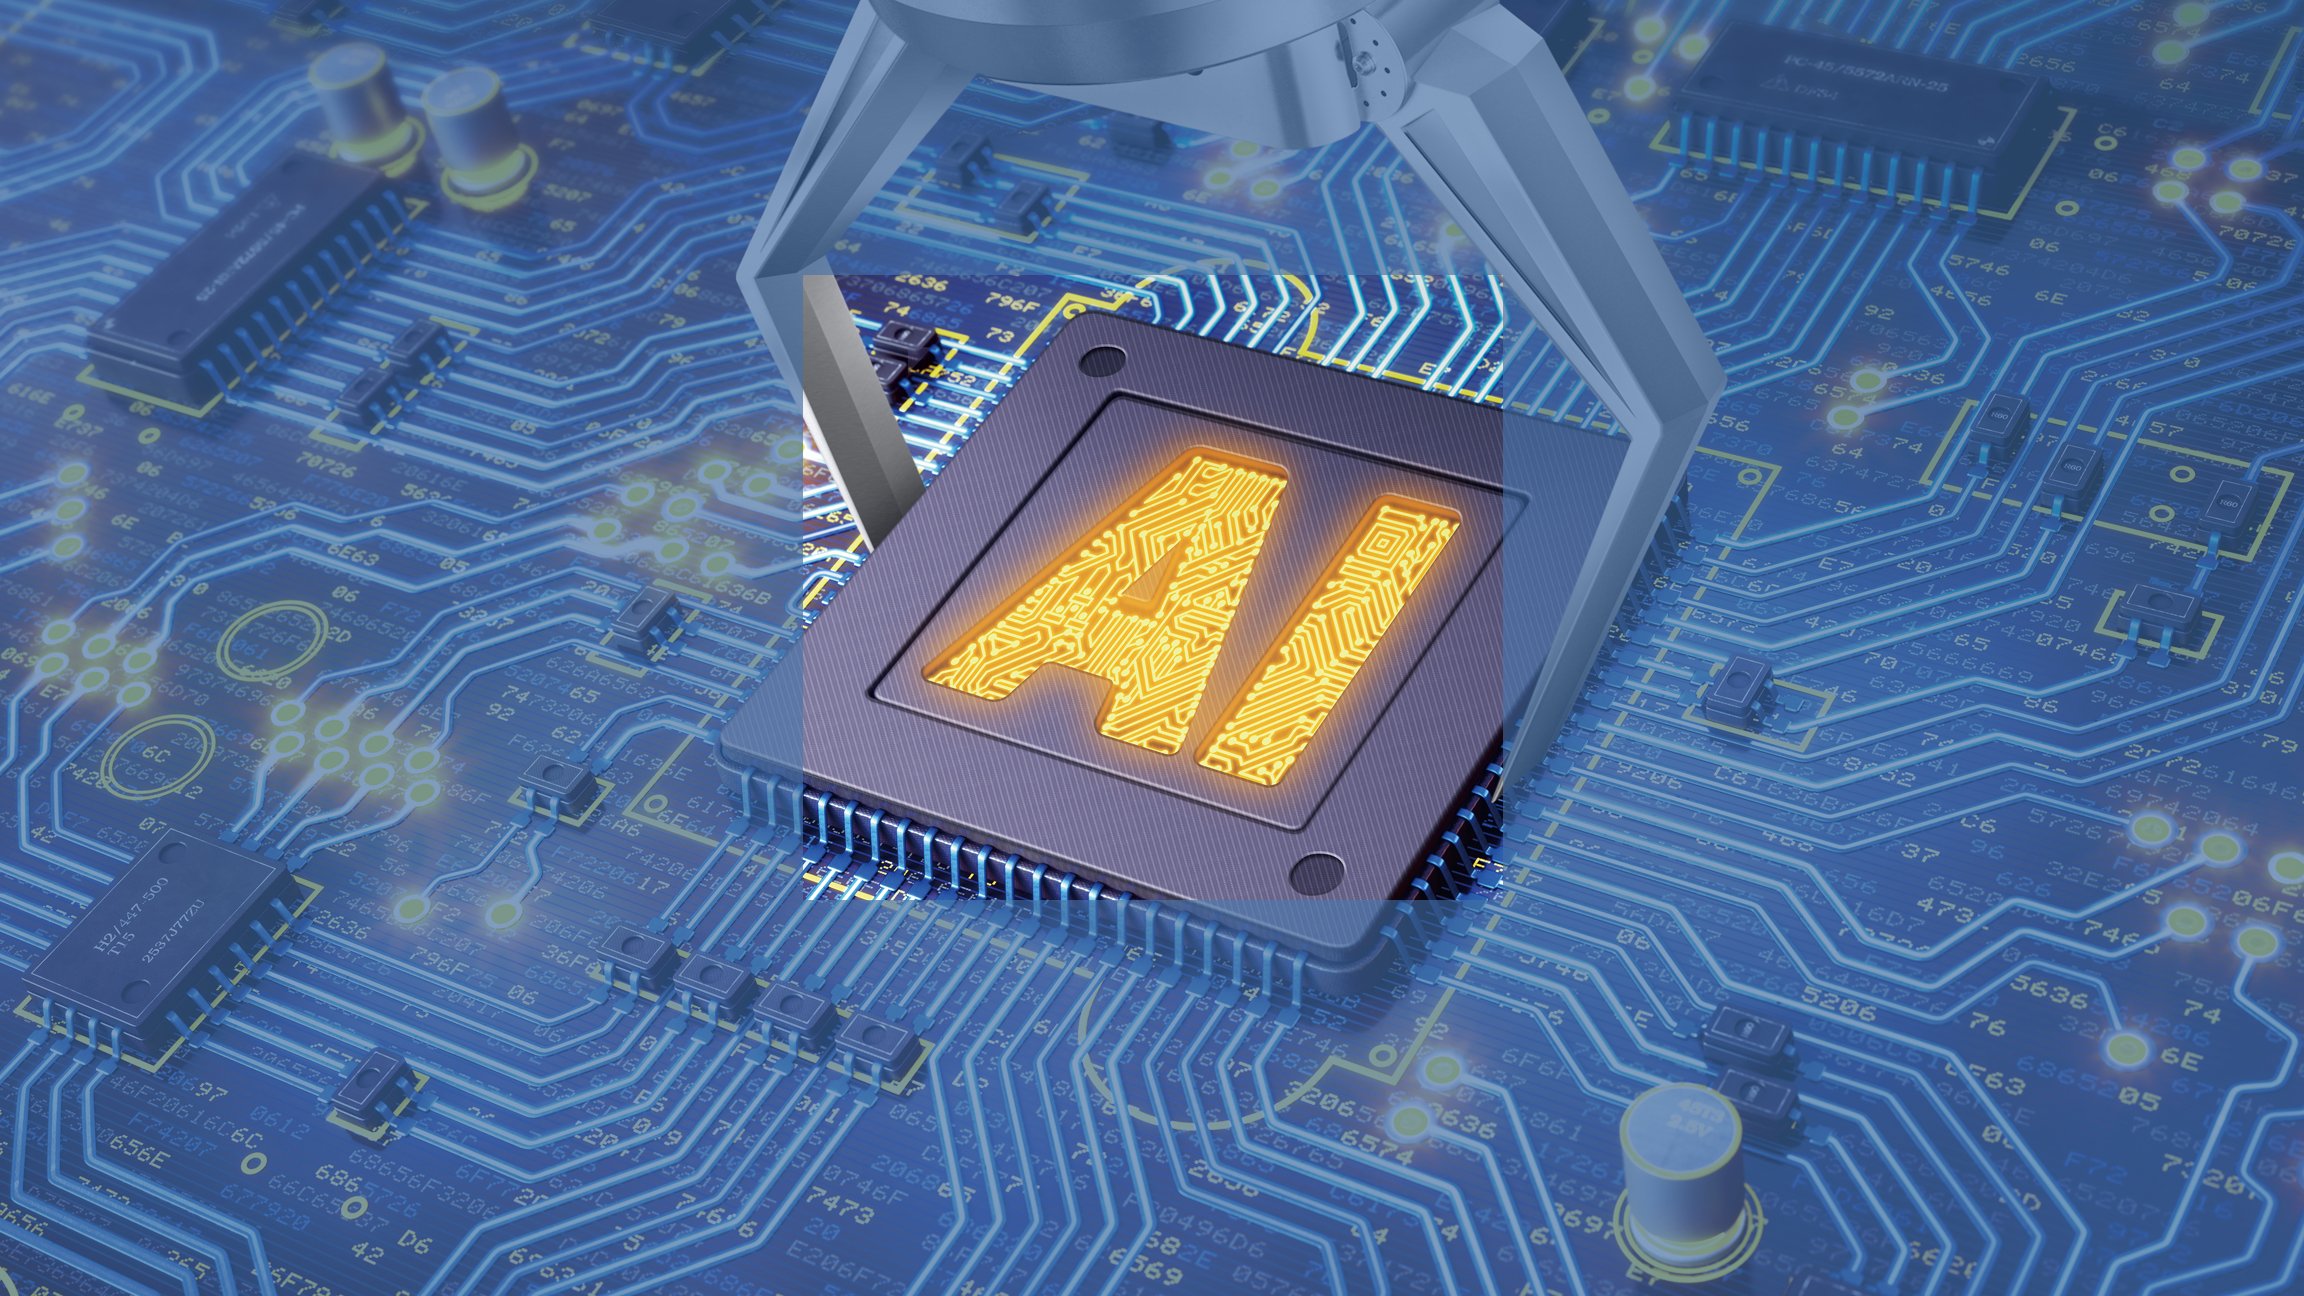 Integrating Artificial Intelligence in your business